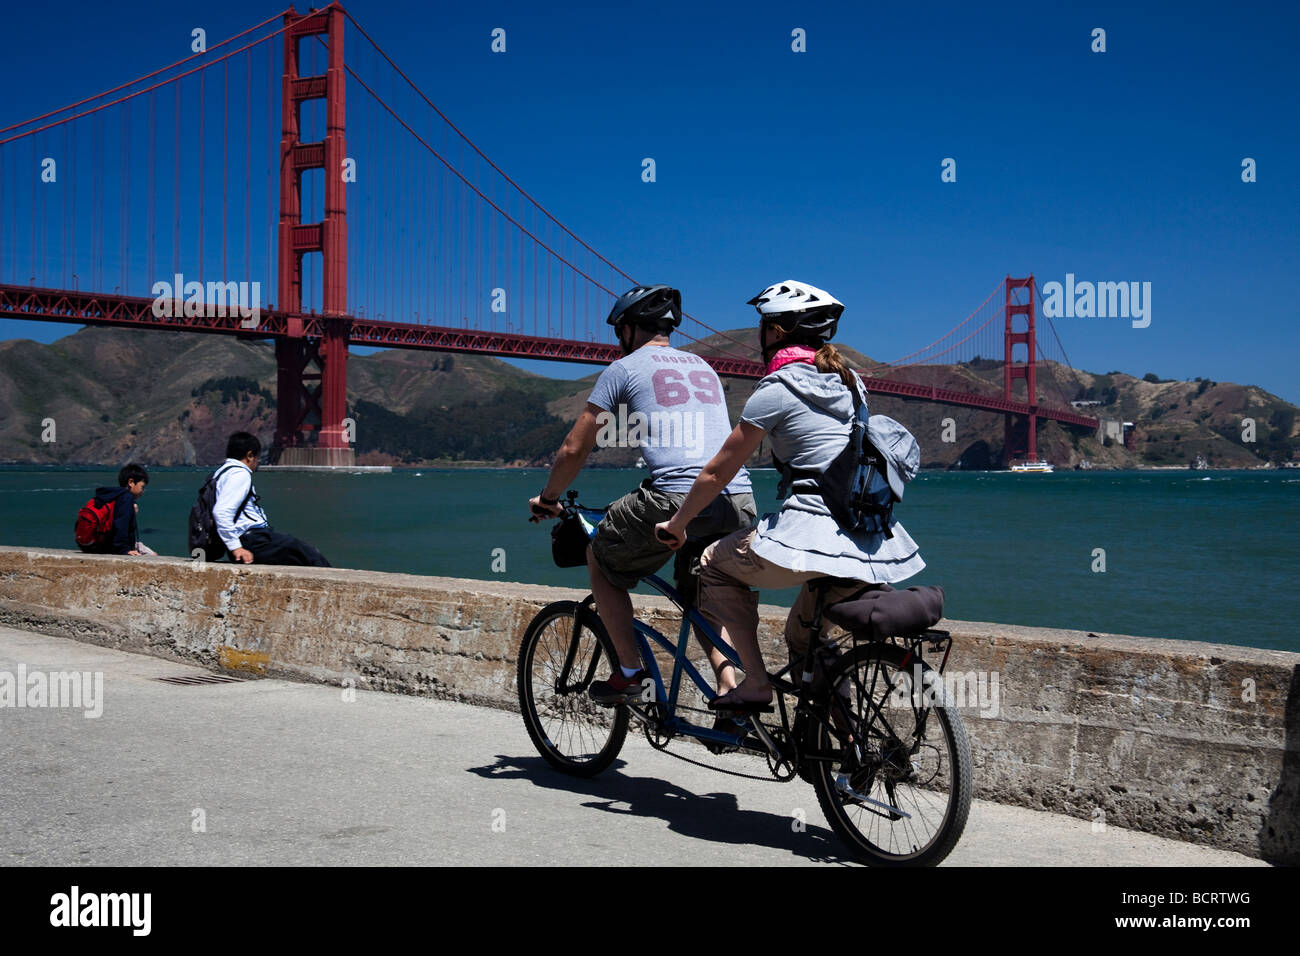 Male and female on Tandem cycle Crissy Field San Francisco, California USA, Golden Gate Bridge in background Stock Photo